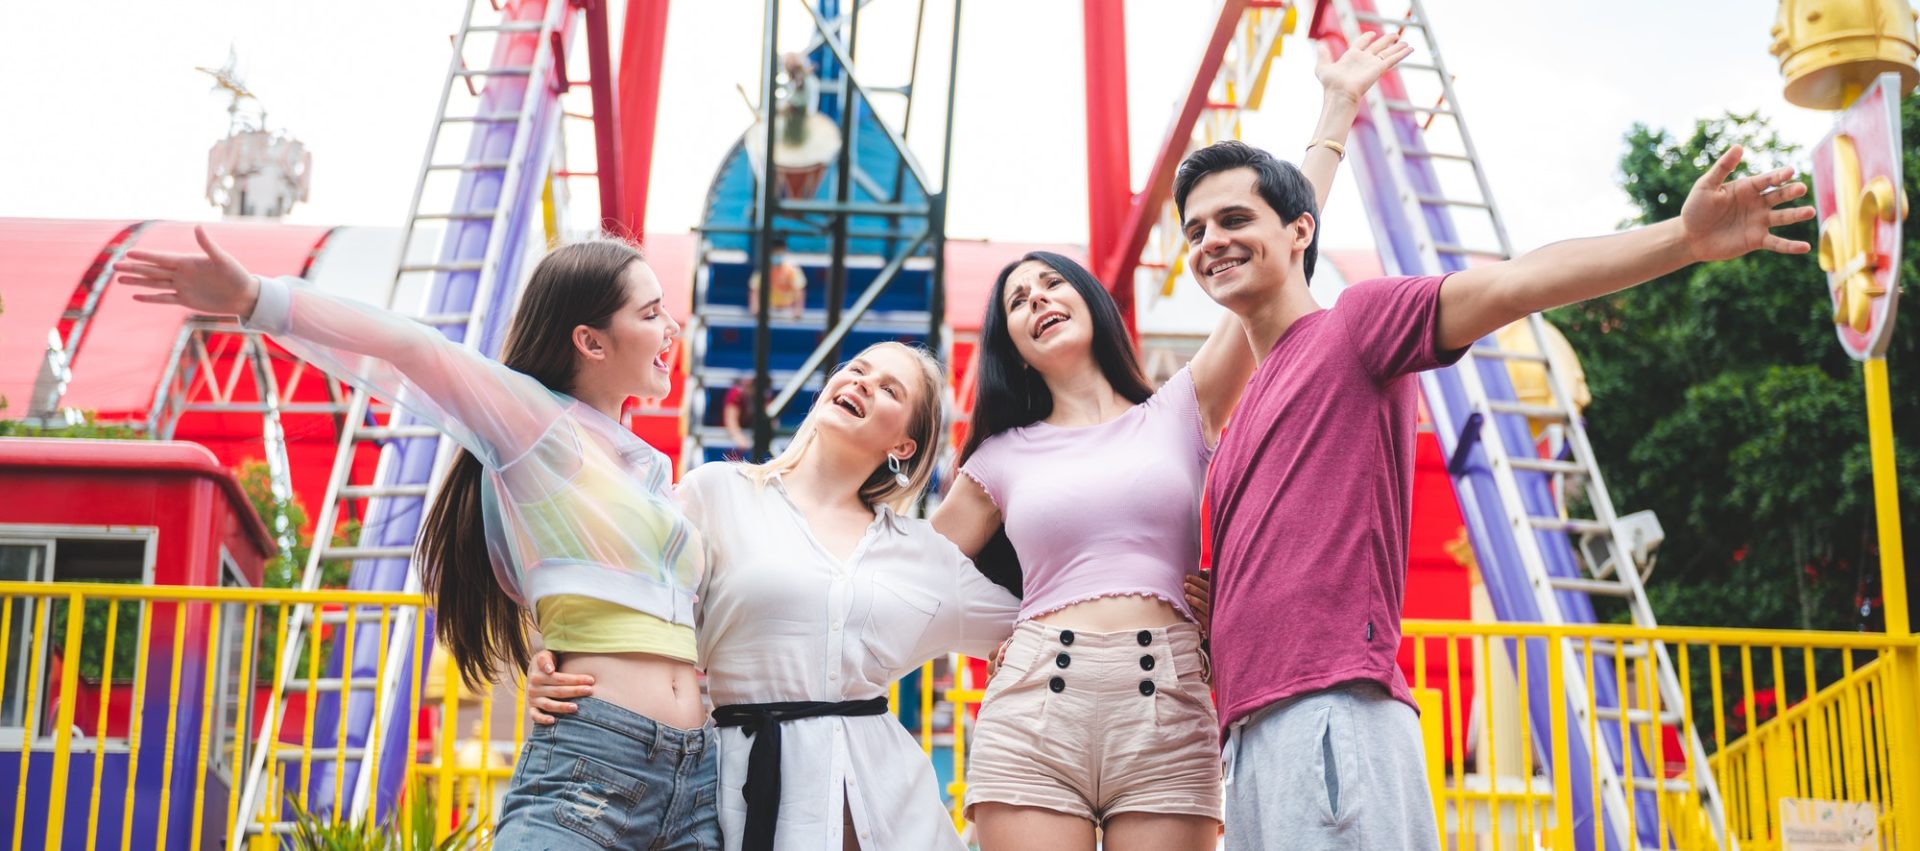 Group of happy best friends laughing and having fun at amusement park